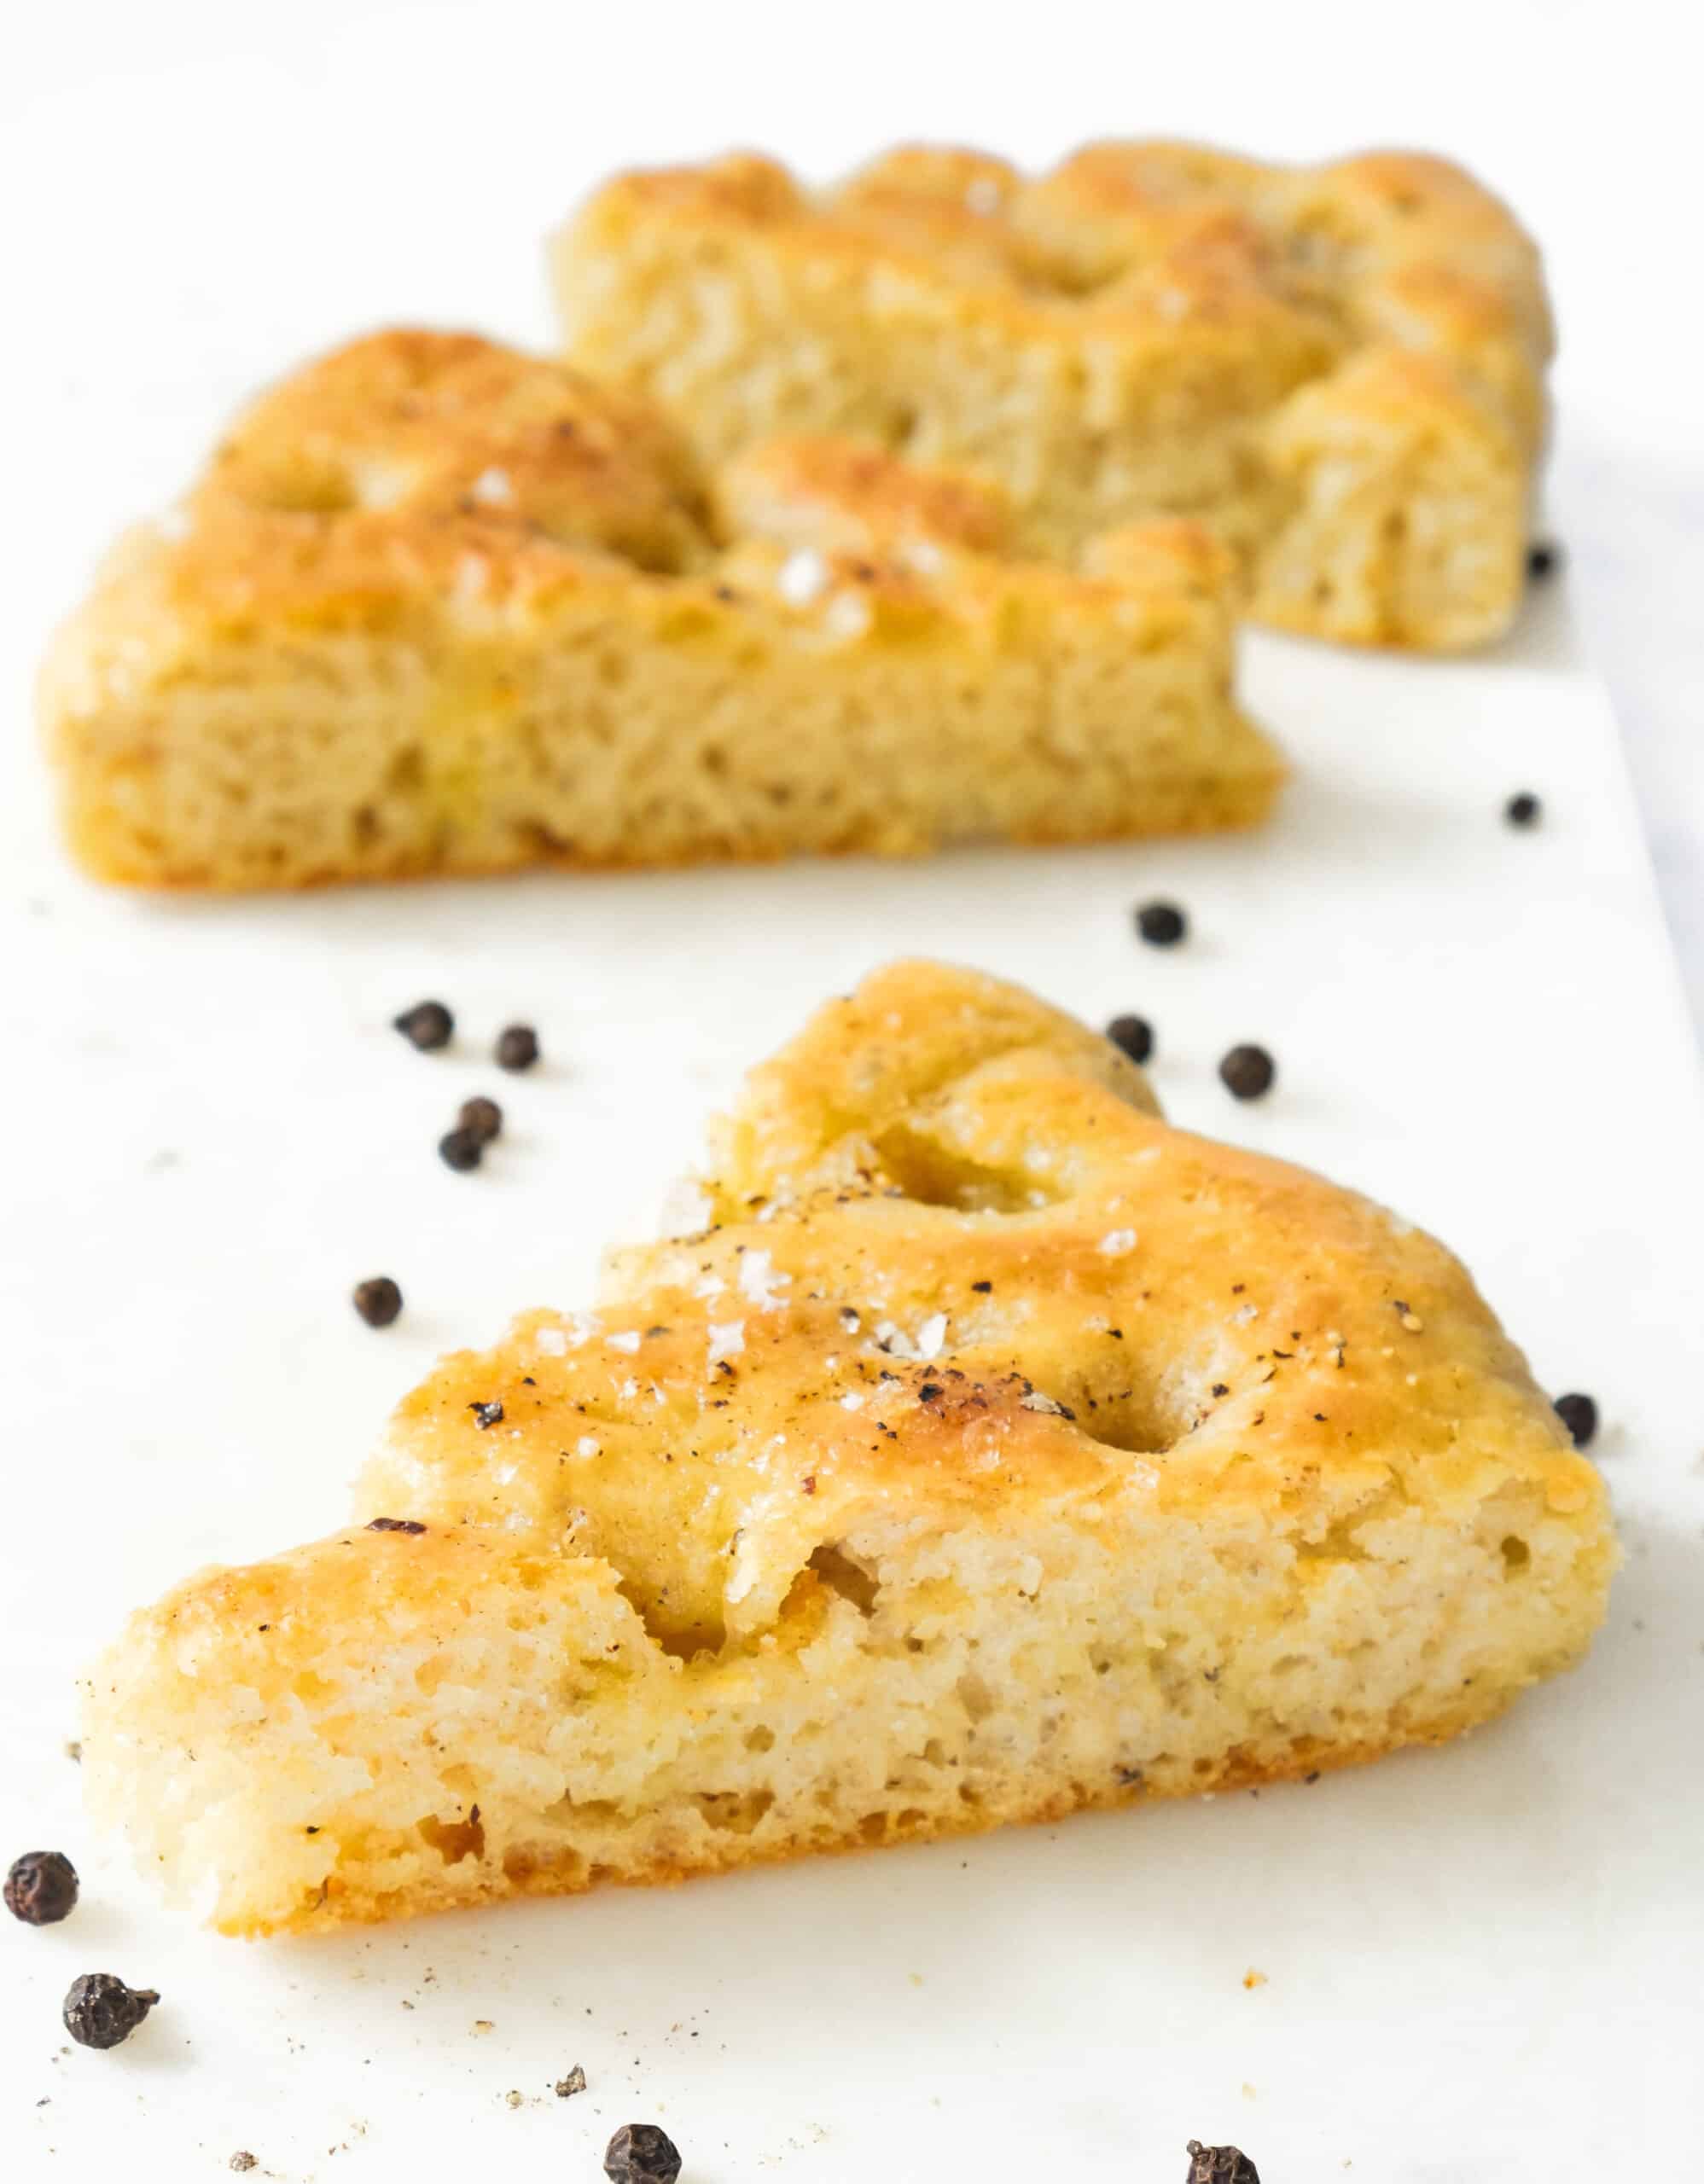 Close-up of a few slices of black pepper focaccia over a white background.